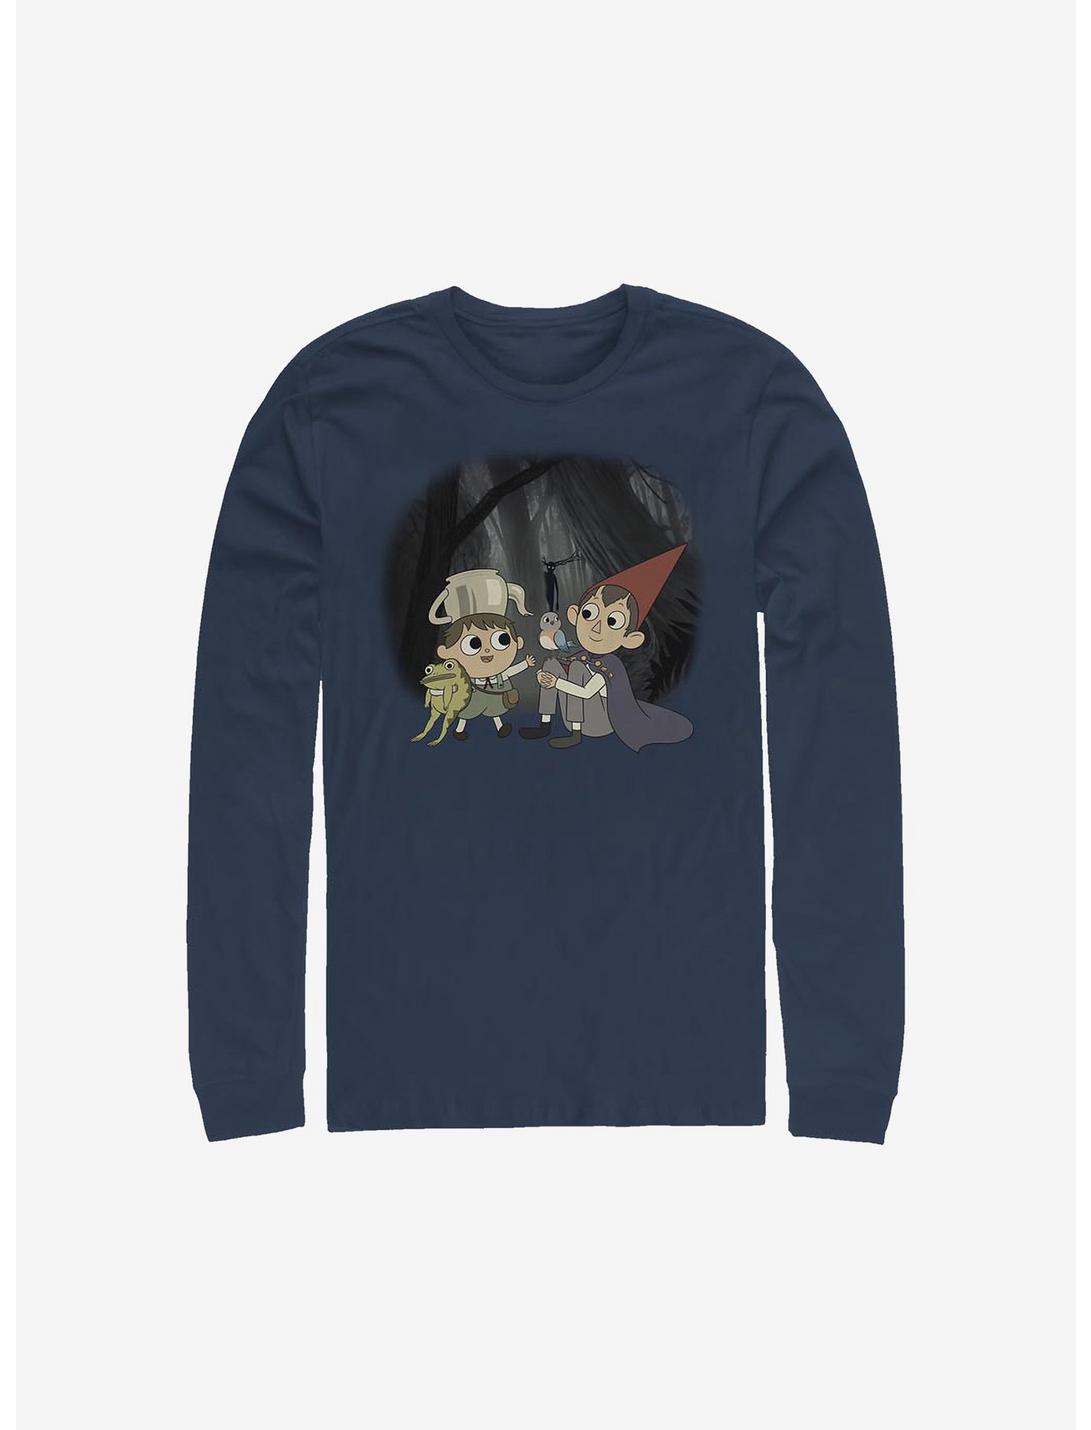 Over The Garden Wall I See You Long-Sleeve T-Shirt, NAVY, hi-res